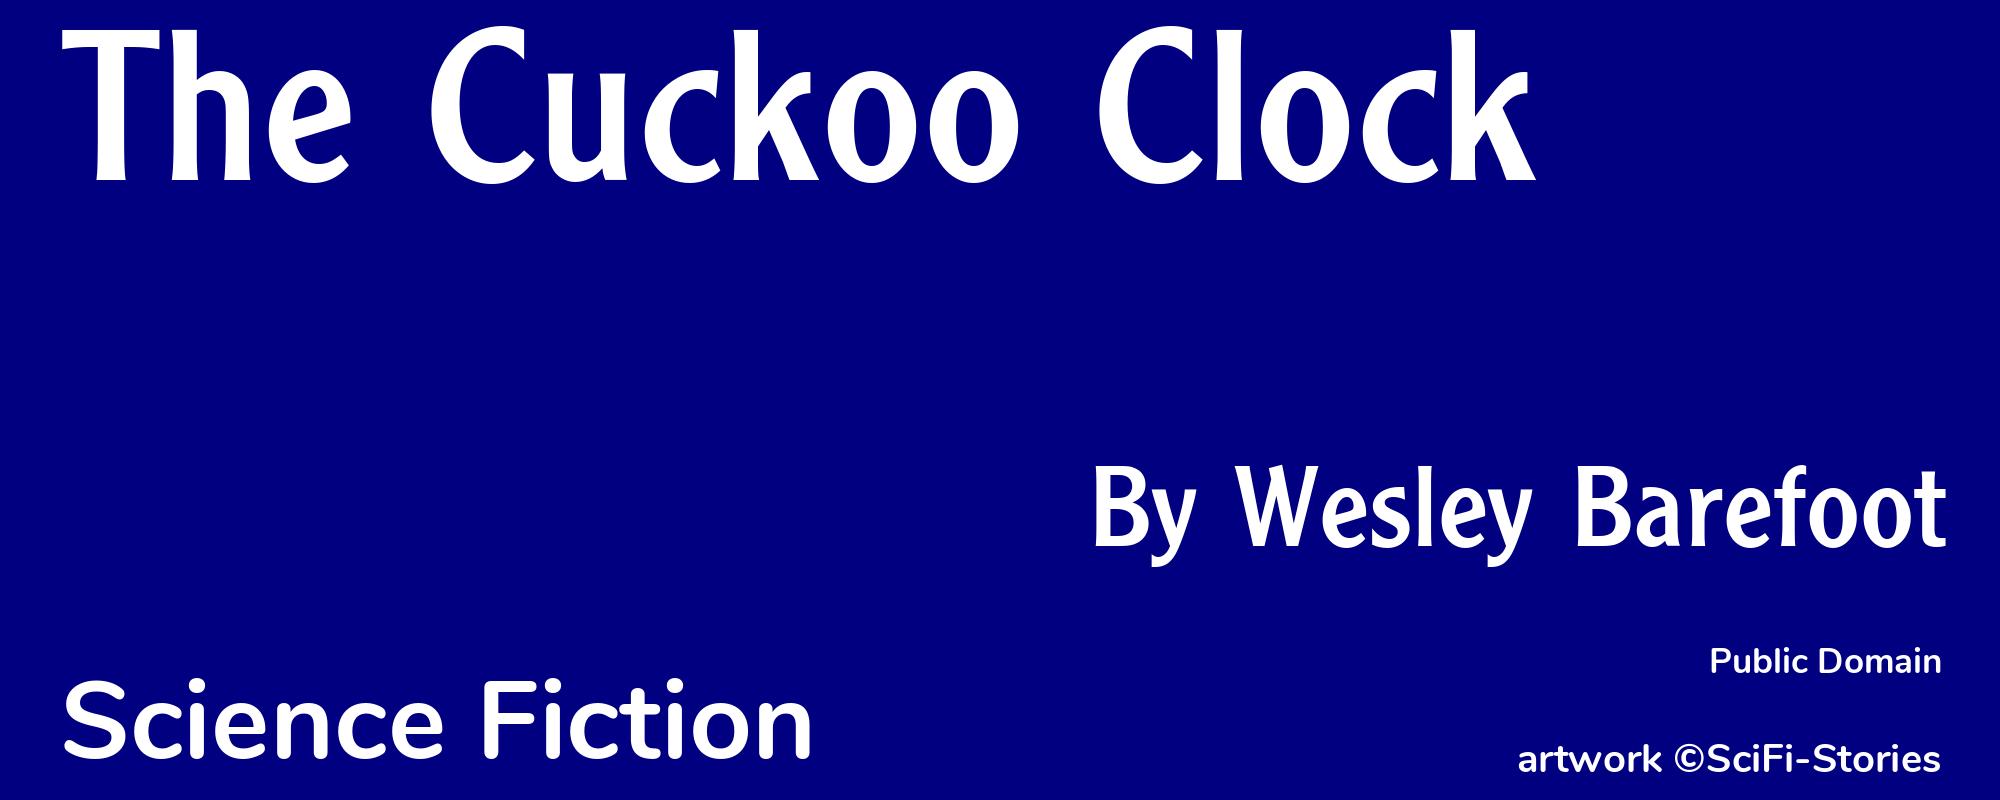 The Cuckoo Clock - Cover